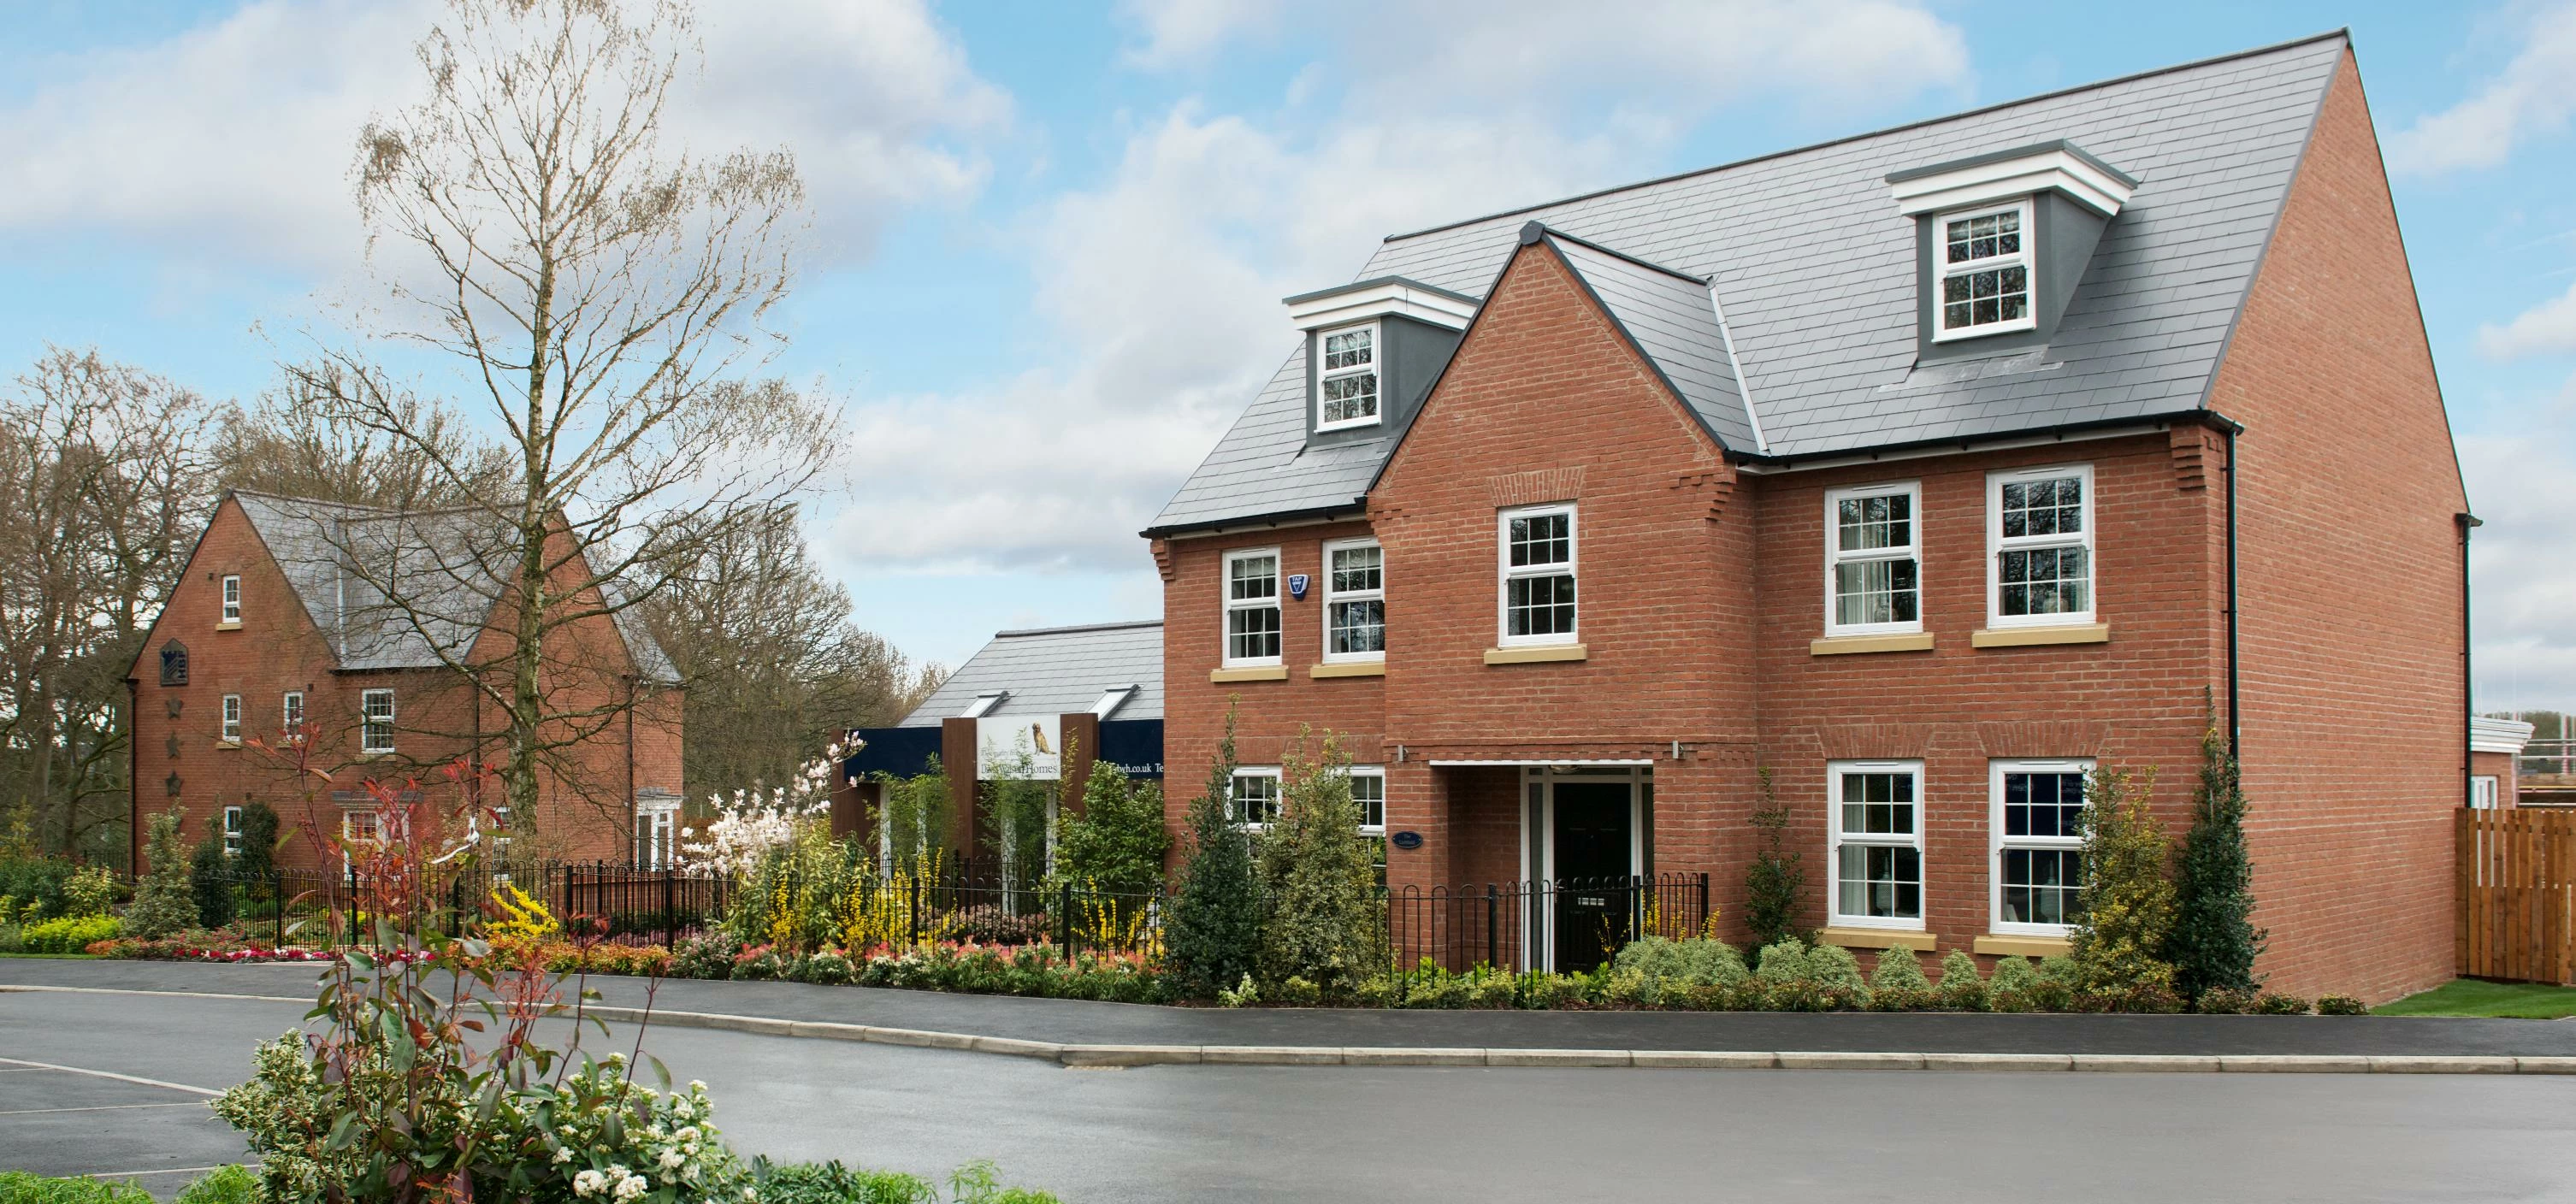 David Wilson Homes launches brand new development in South Yorkshire